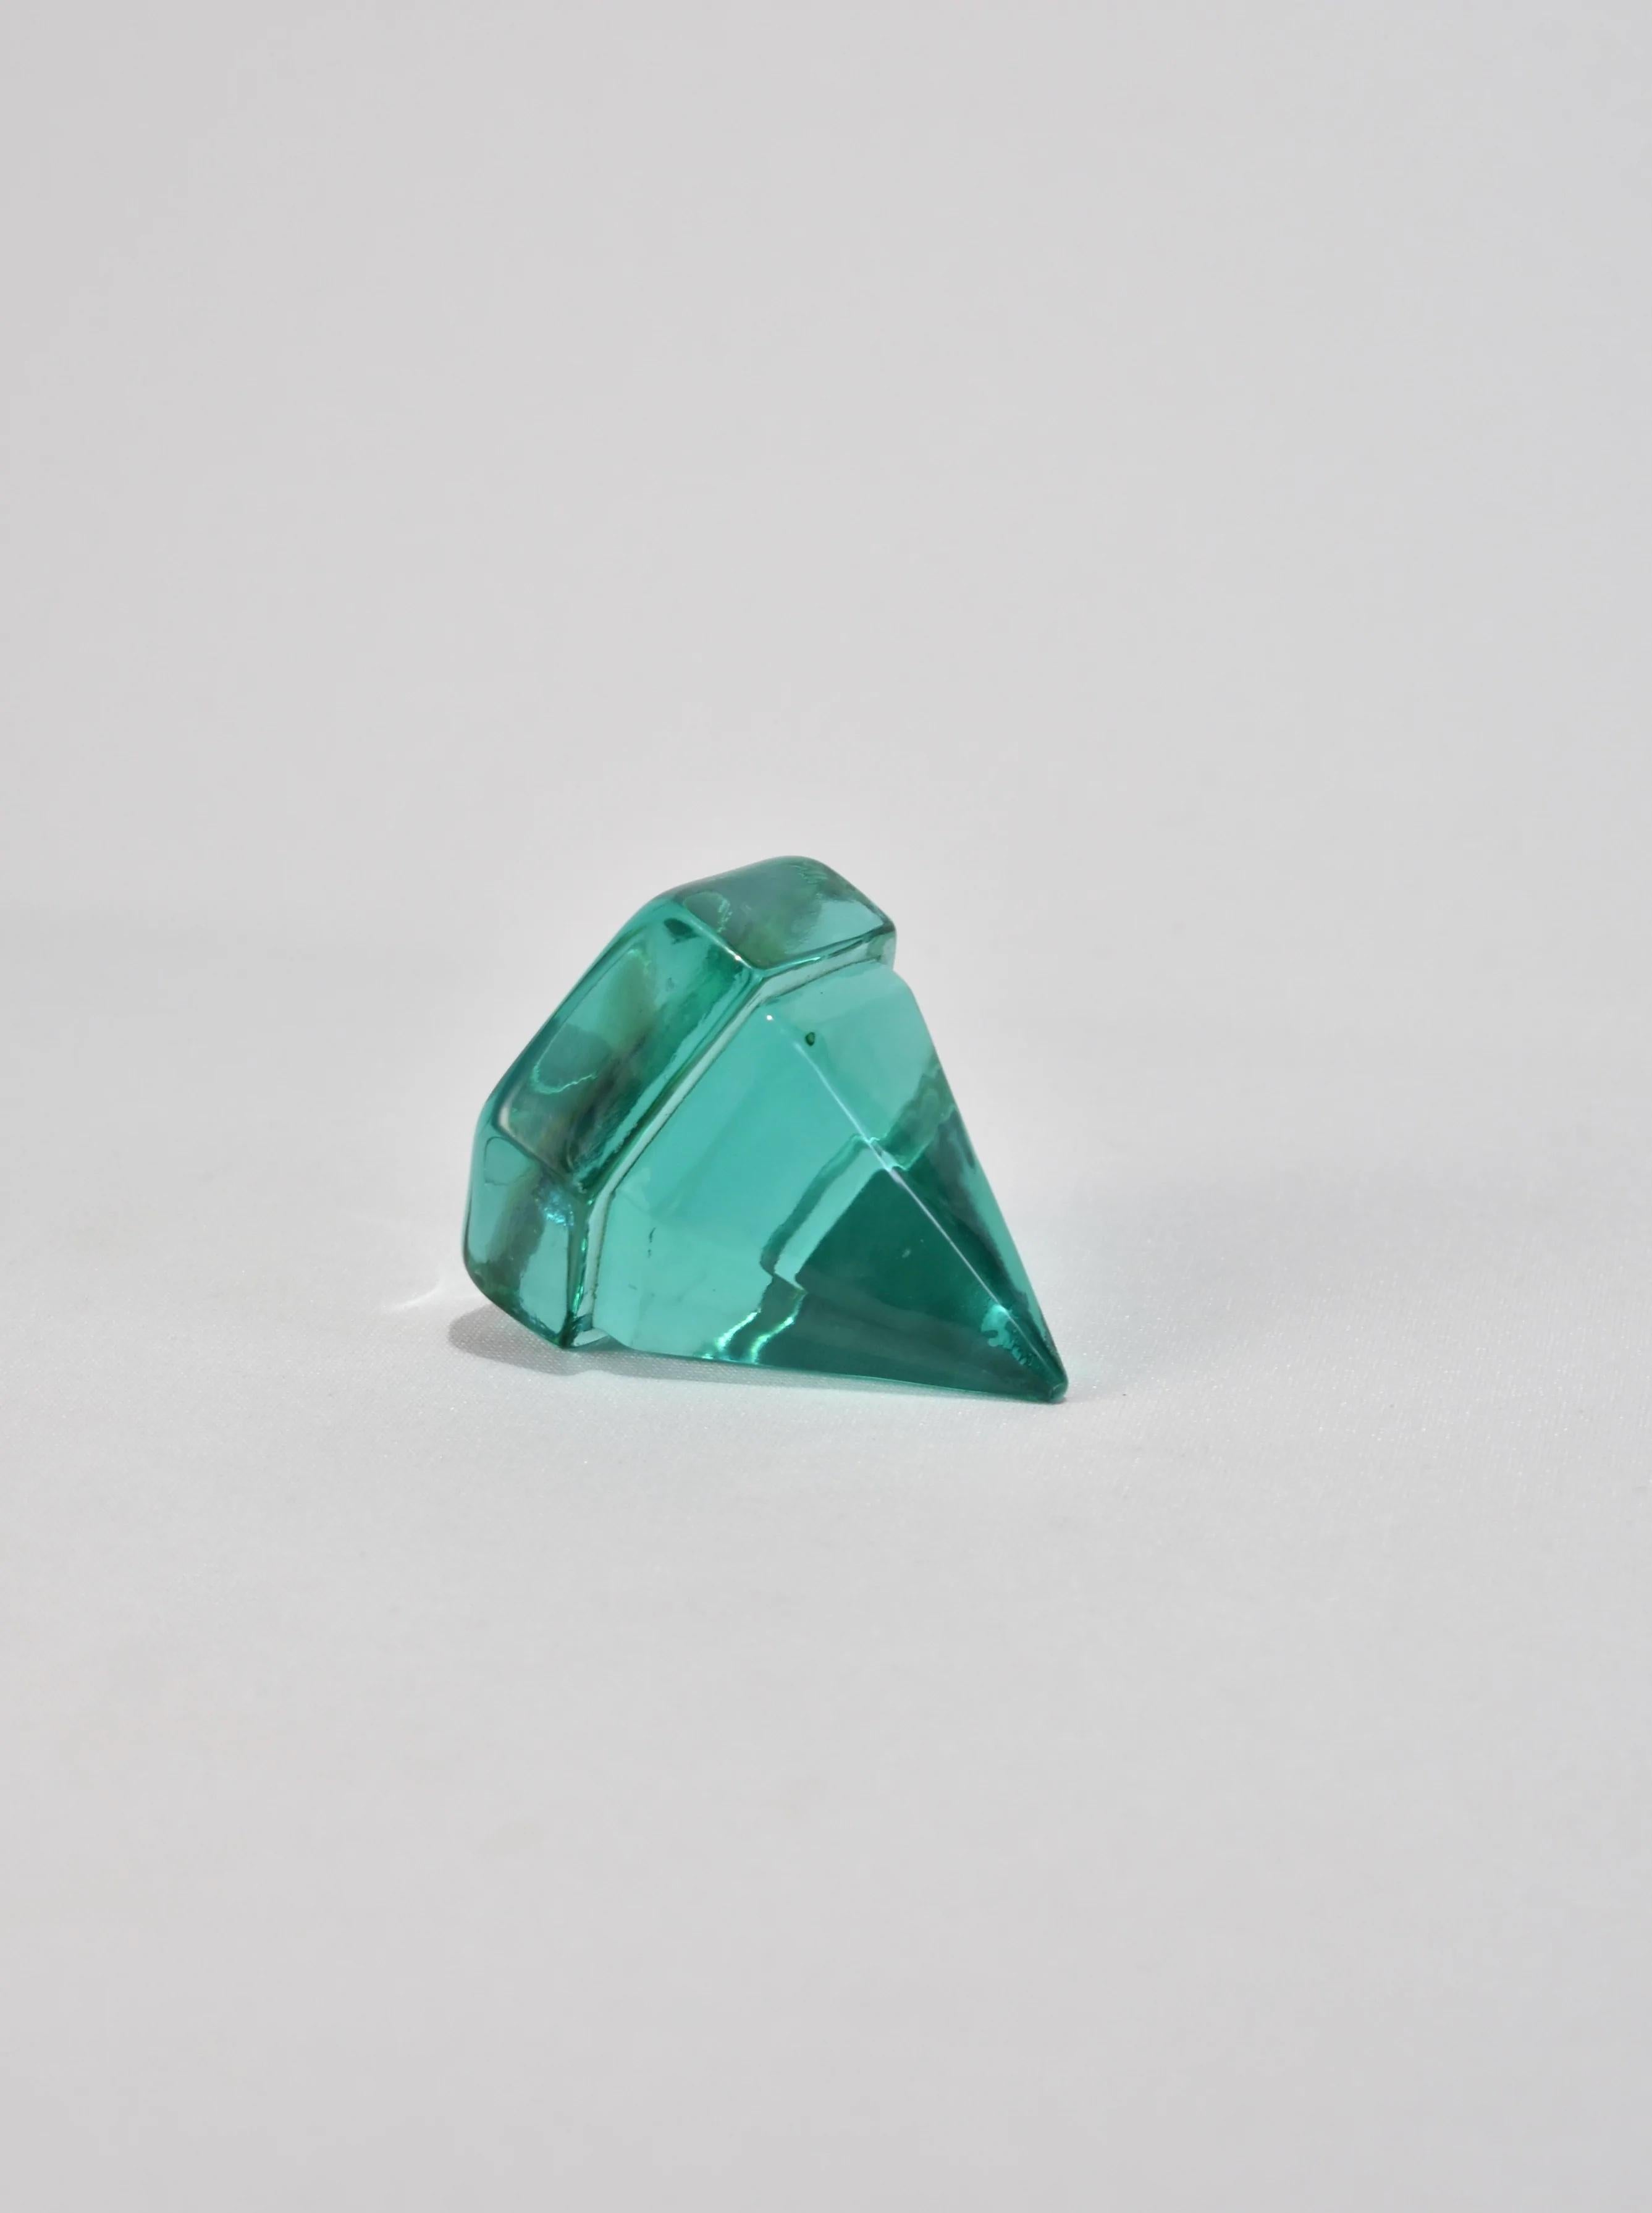 Beautiful teal glass prism. May be used as a paperweight or displayed on its own as a sculptural piece.